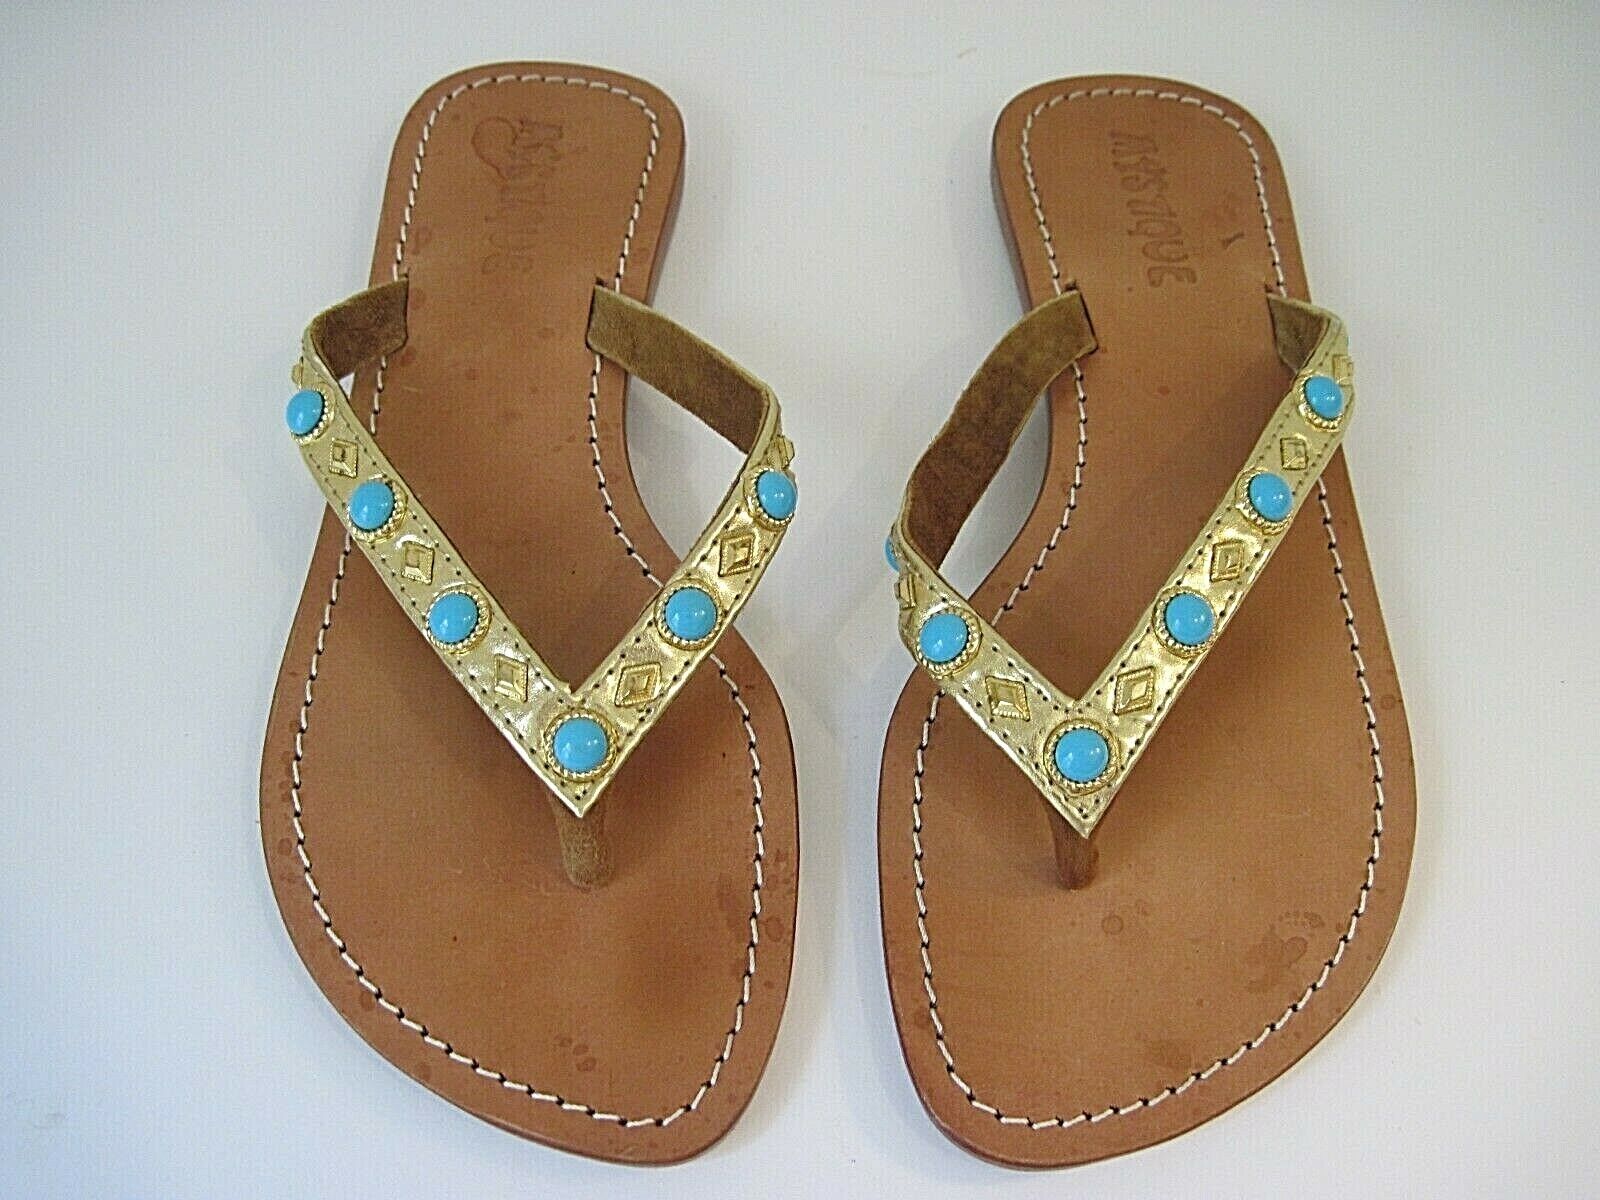 Mystique Regular store Indianapolis Mall Women#039;s Gold Leather Embellished Sandals Turquoise